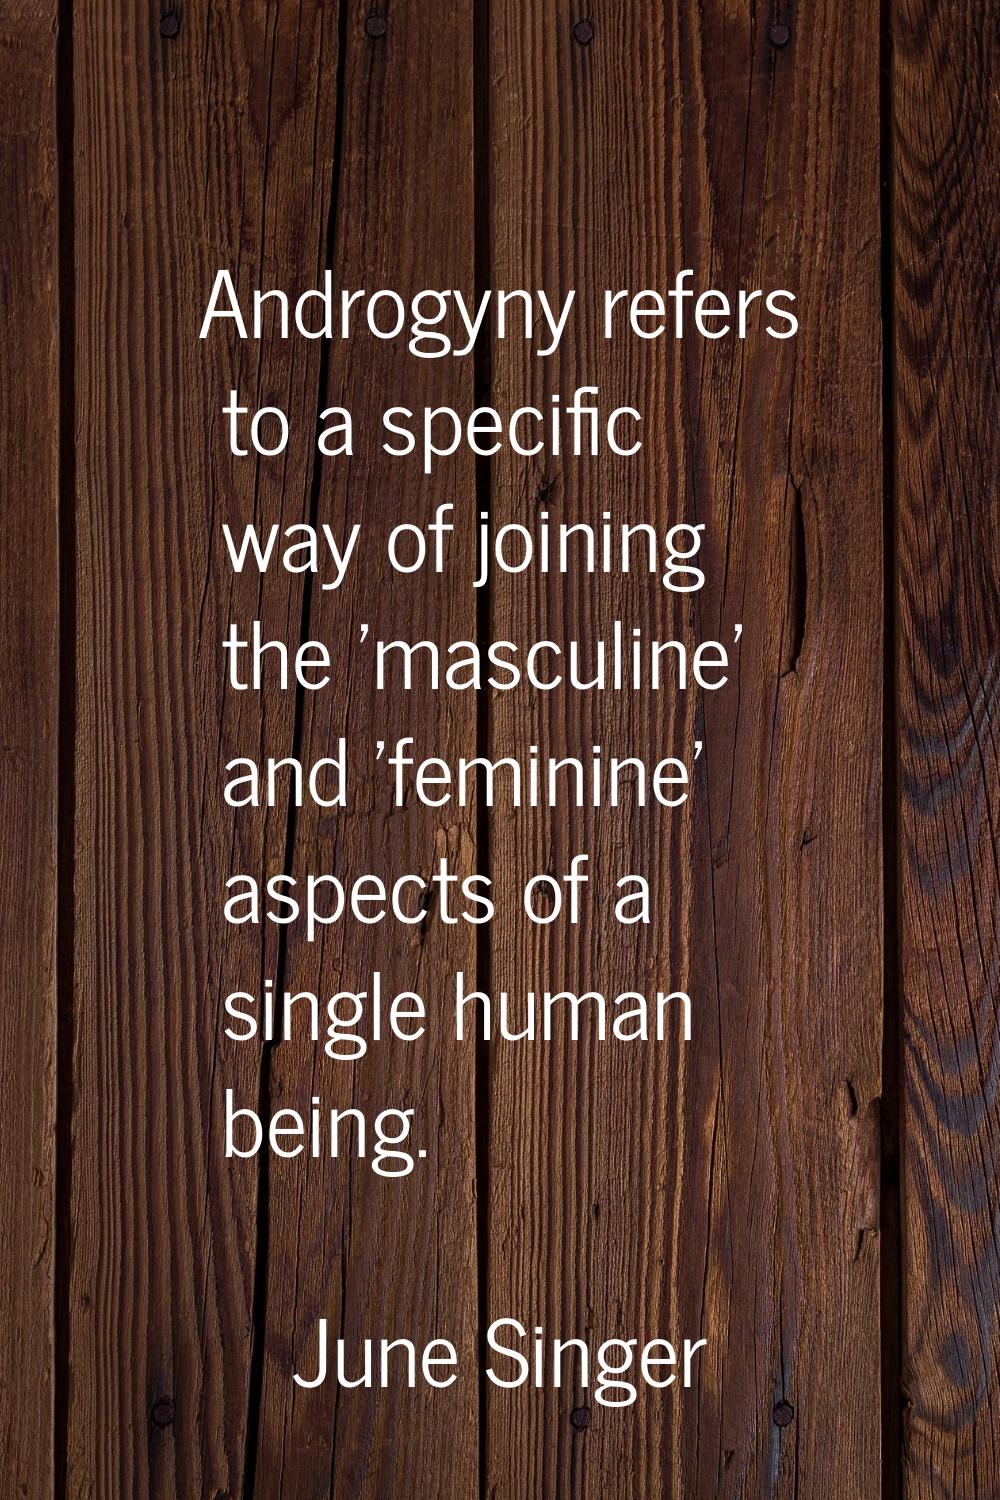 Androgyny refers to a specific way of joining the 'masculine' and 'feminine' aspects of a single hu